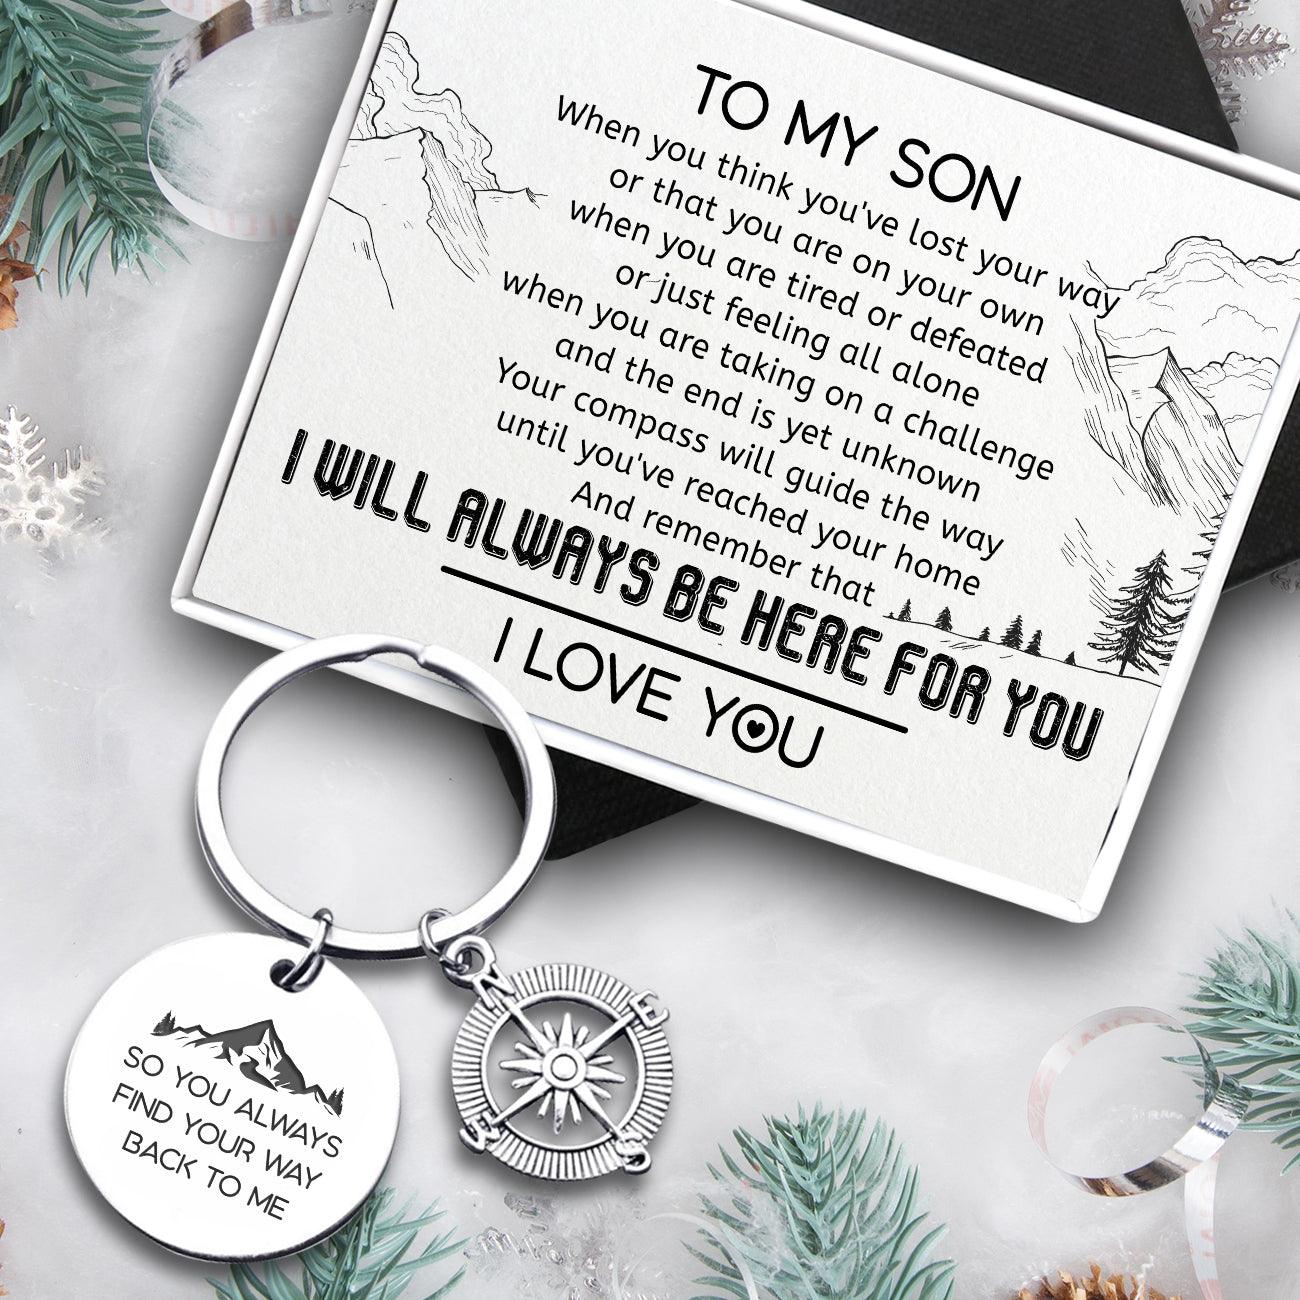 Compass Keychain - Travel - To My Son - Your Compass Will Guide The Way - Augkw16005 - Gifts Holder